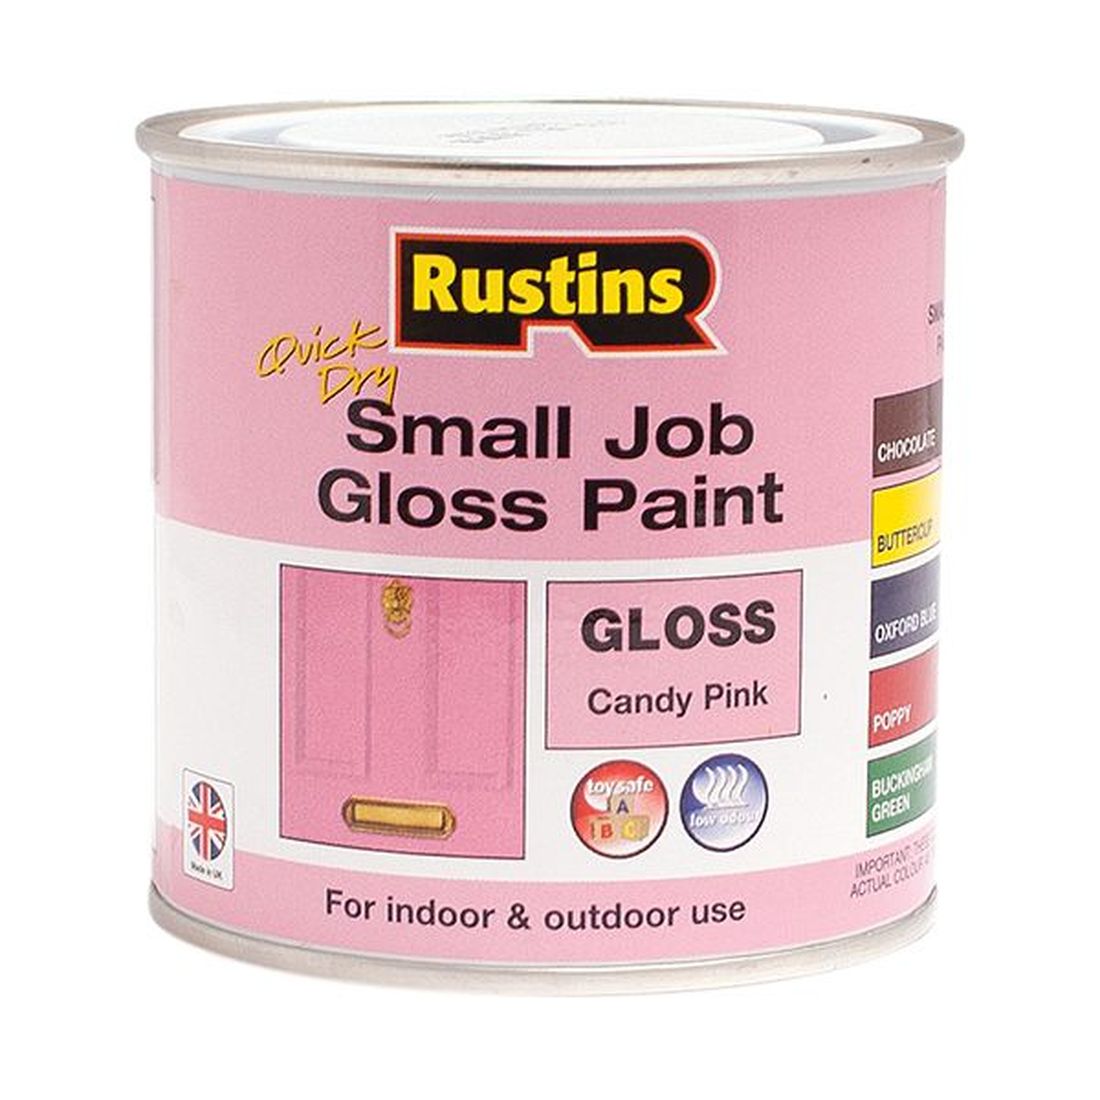 Rustins Quick Dry Small Job Gloss Paint Candy Pink 250ml                                